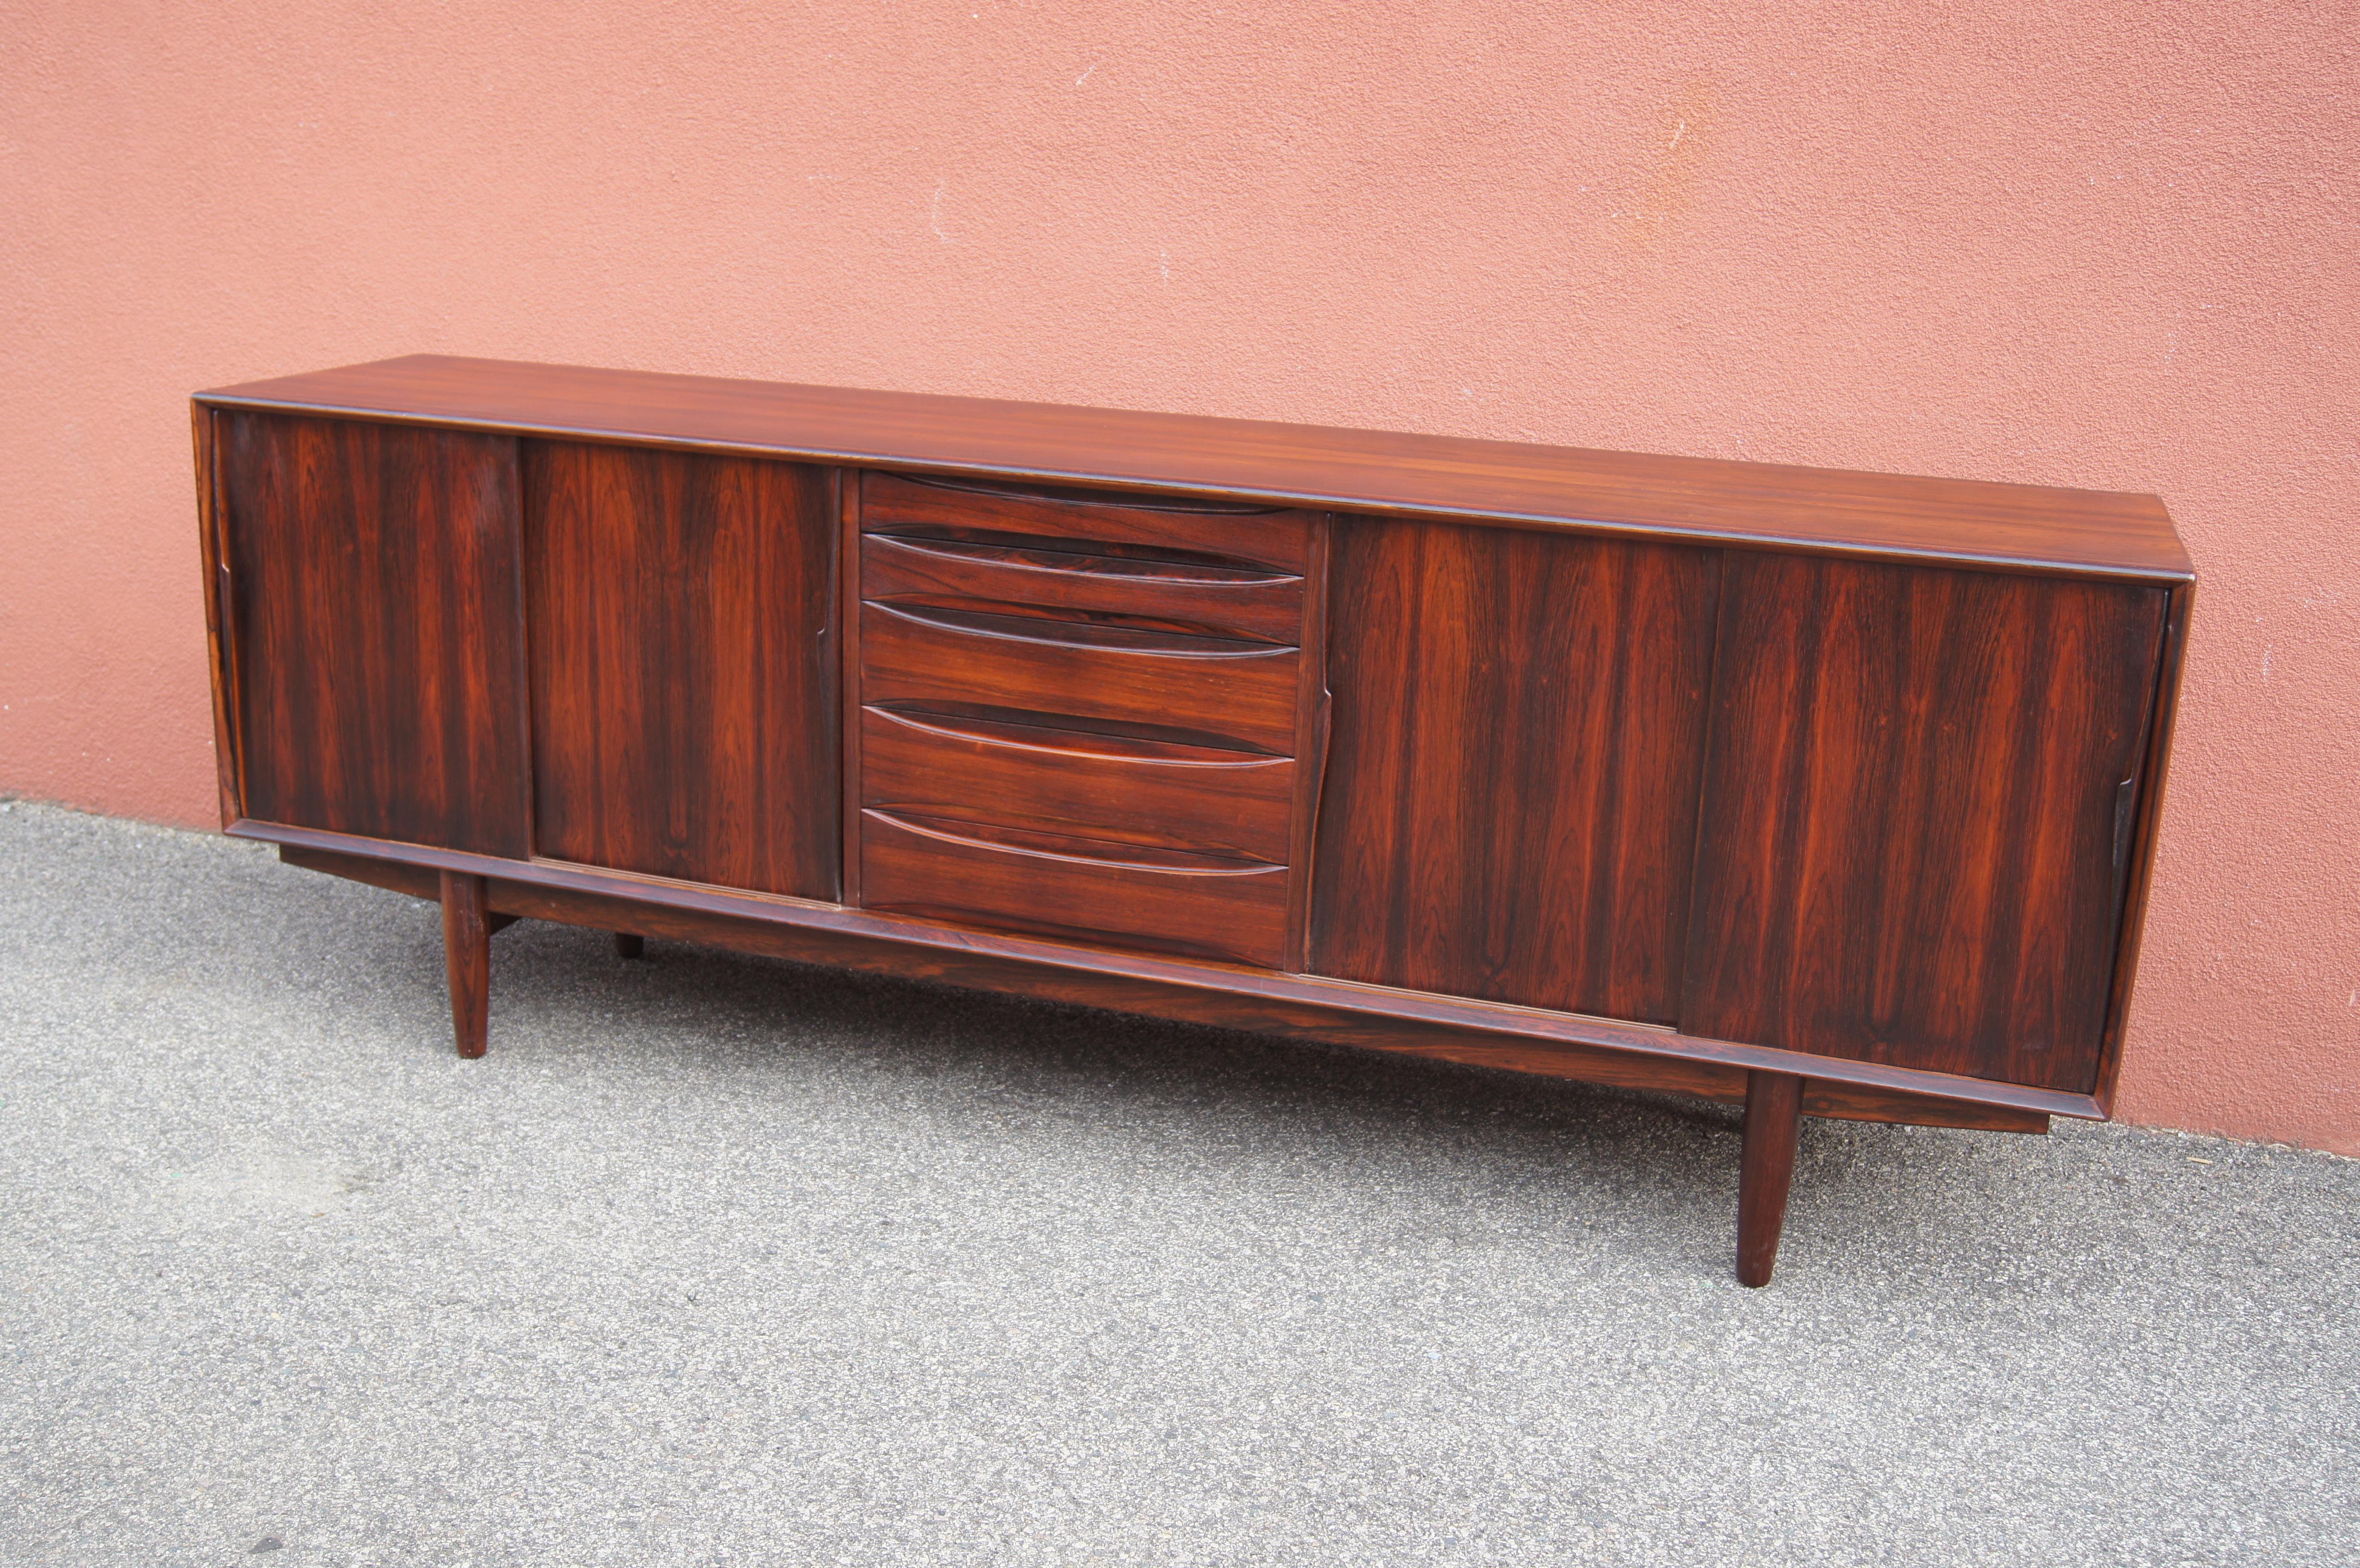 Designed by Arne Vodder for Skovby Møbelfabrik, this sideboard, model 7738, comprises a rosewood case on a plinth base. At center are five drawers, the top two of which are narrower than those below. On either side, two doors with elegant sculptural